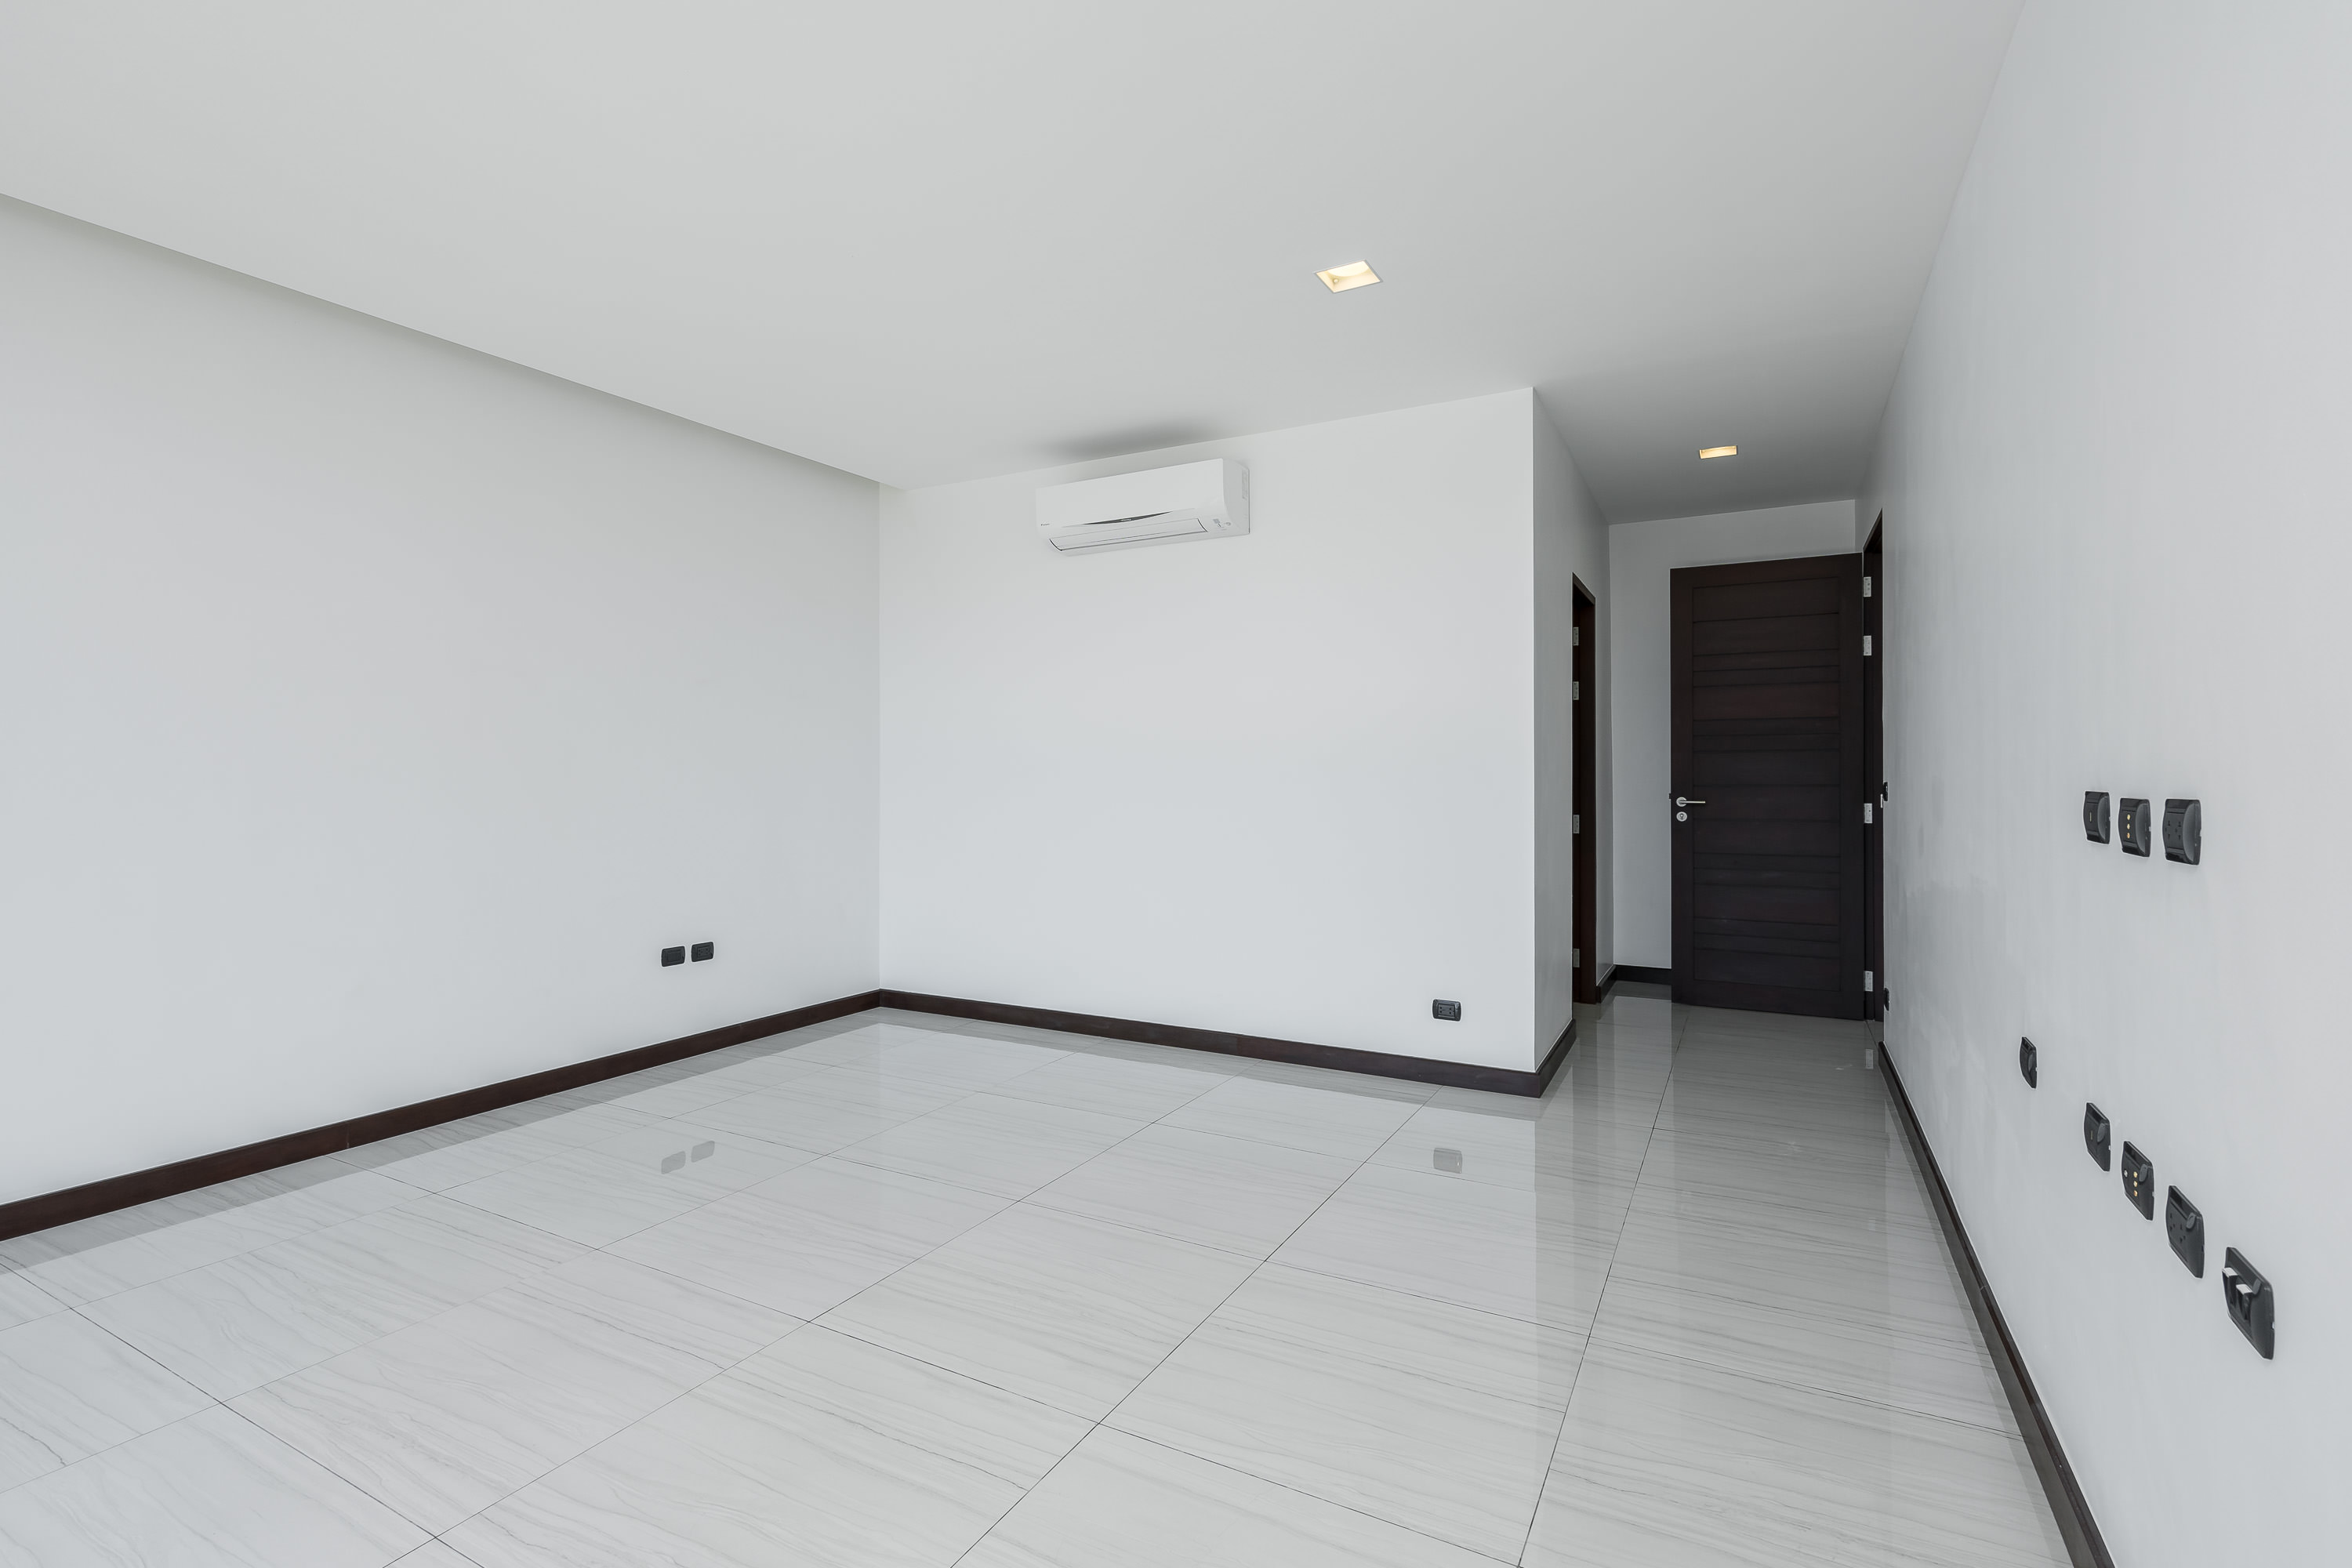 Verano Residence - Contemporary 4+1 Bedroom Seaview Pool Villa in Chaweng Noi for Sale: Contemporary 4+1 Bedroom Seaview Pool Villa in Chaweng Noi for Sale